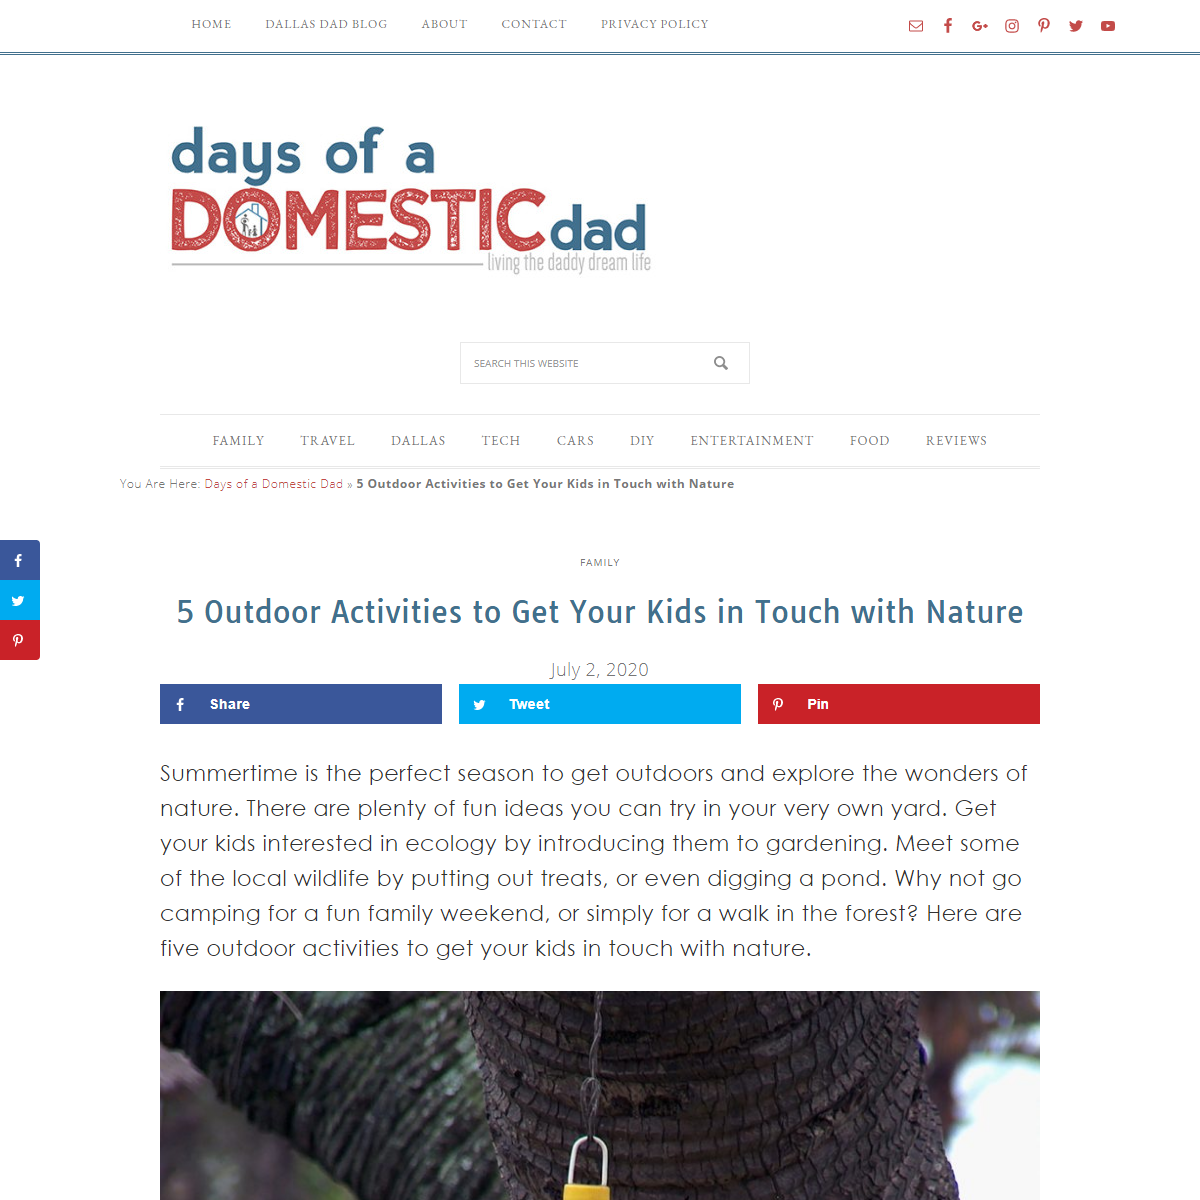 A complete backup of https://daysofadomesticdad.com/5-outdoor-activities-to-get-your-kids-in-touch-with-nature/